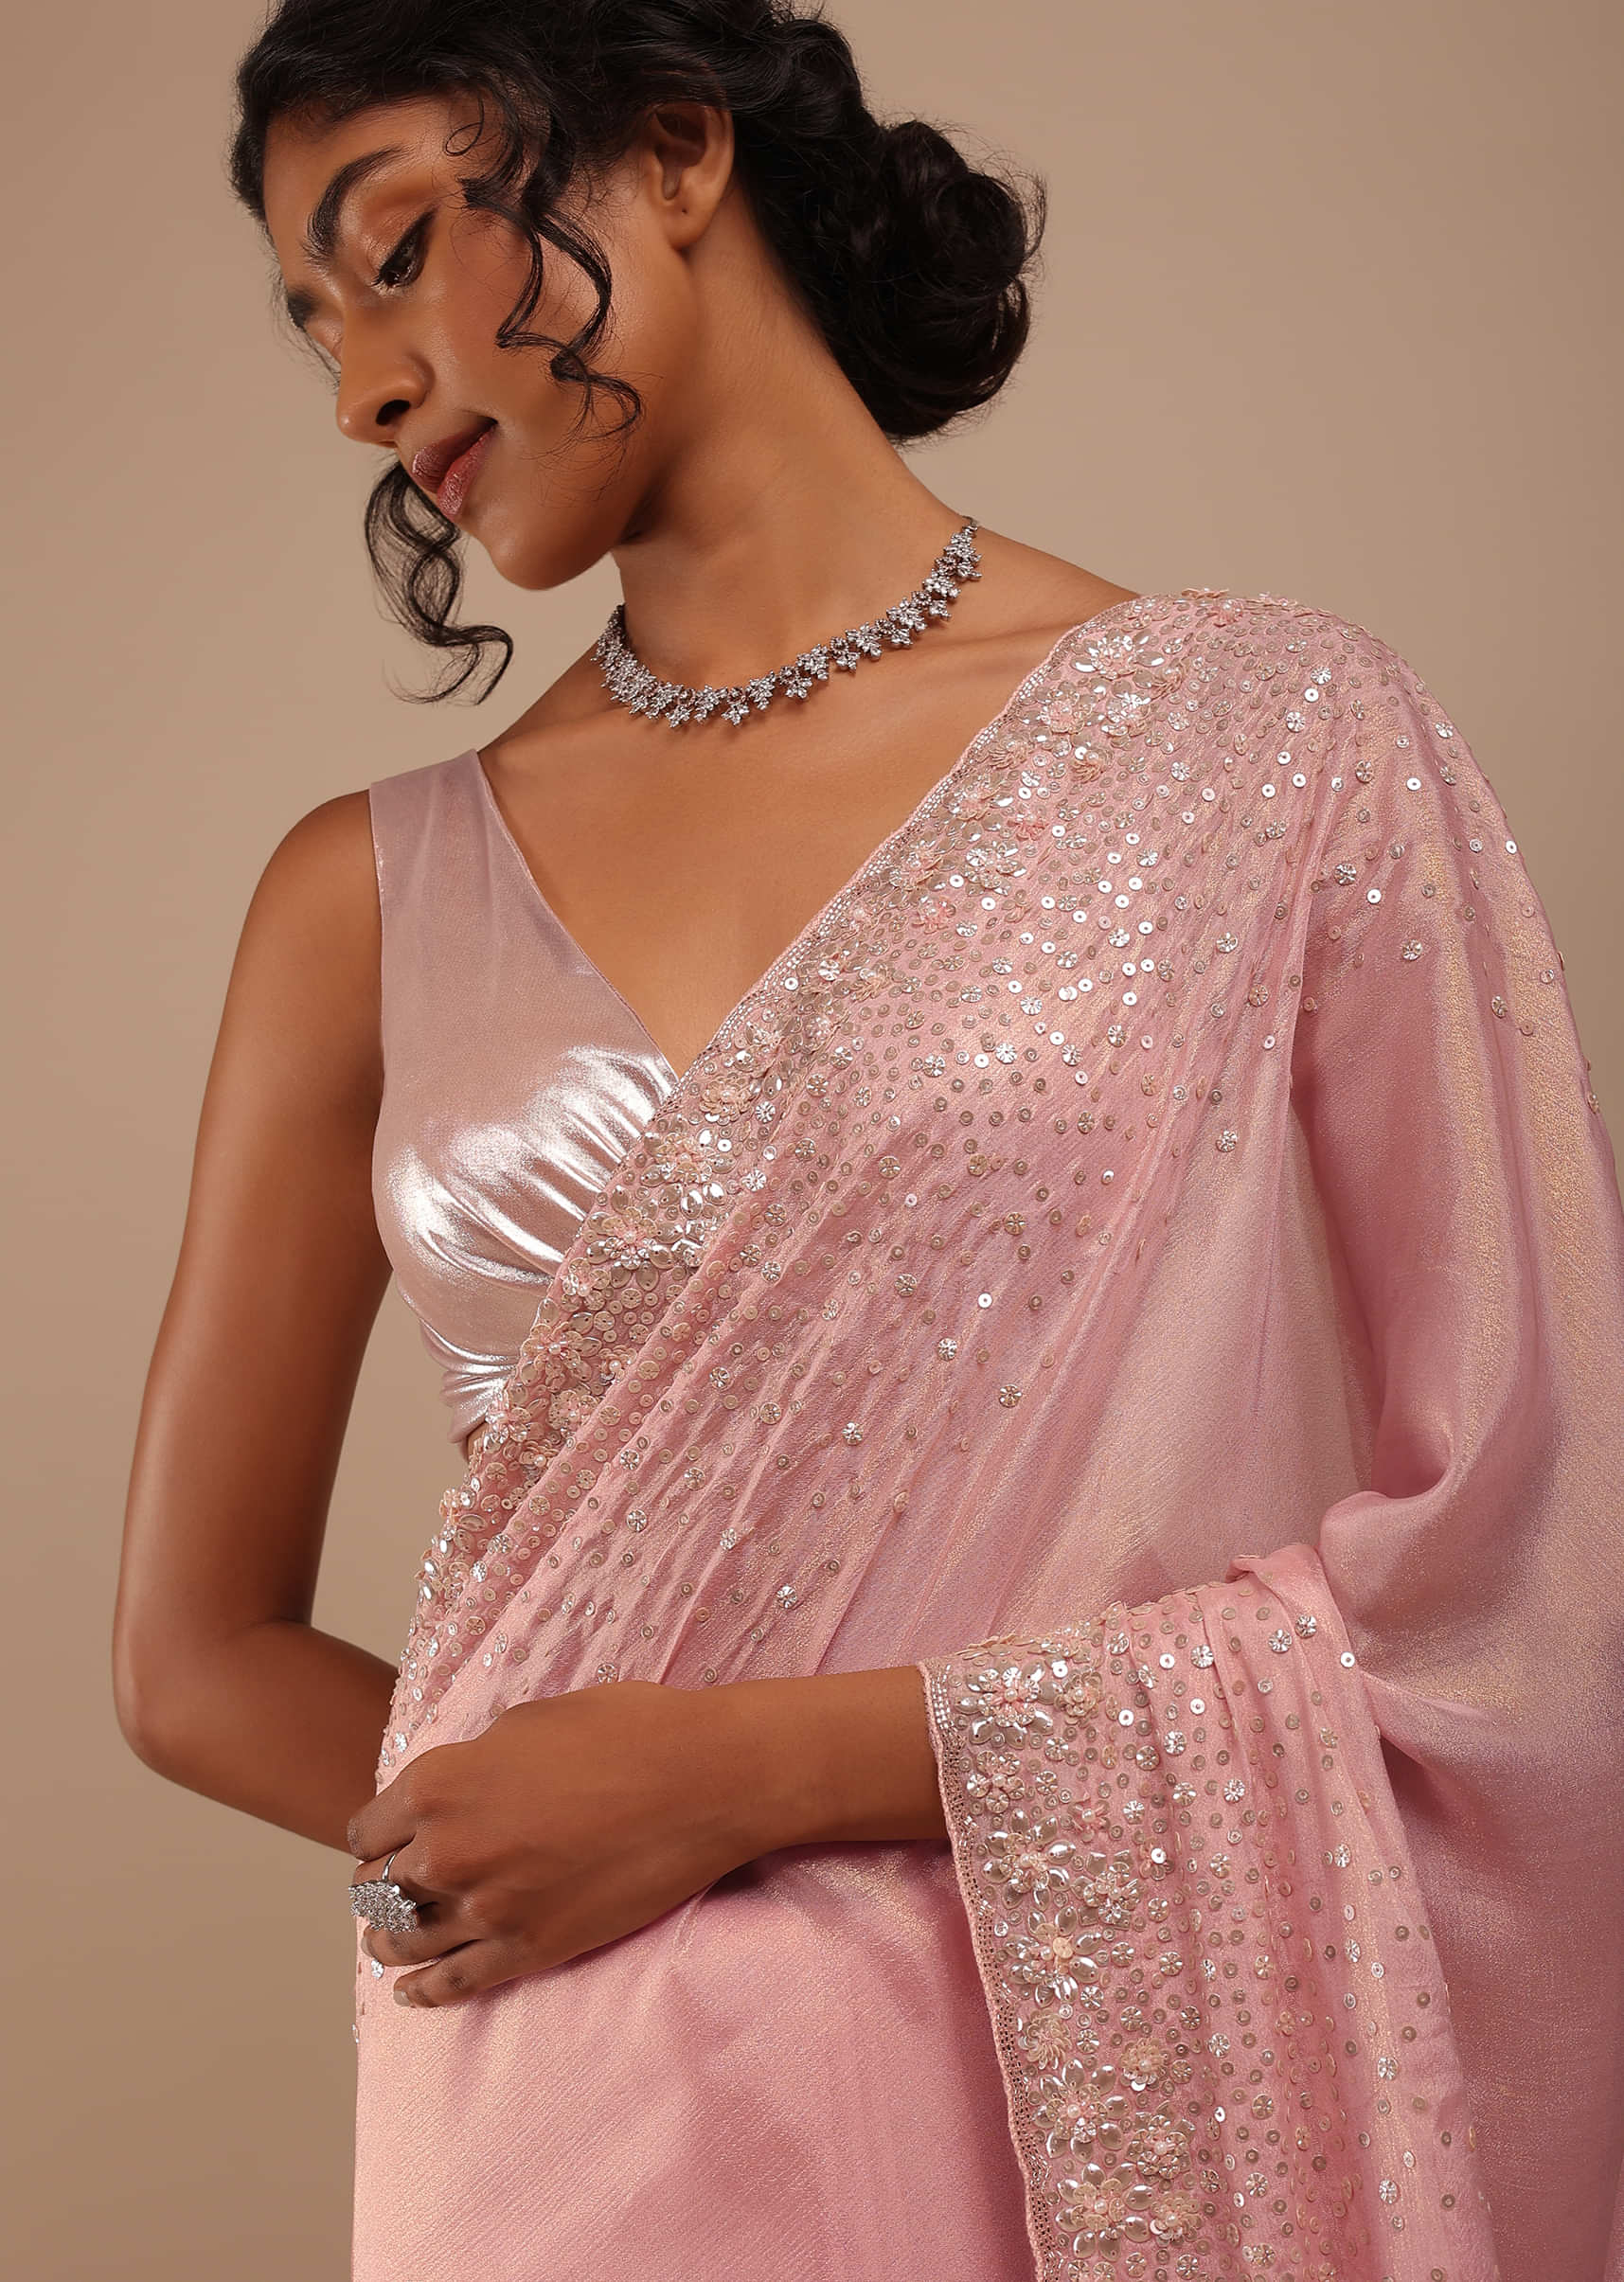 Buy Embroidery Blush Pink Sequin Saree with Shimmer Online KALKI Fashion  India